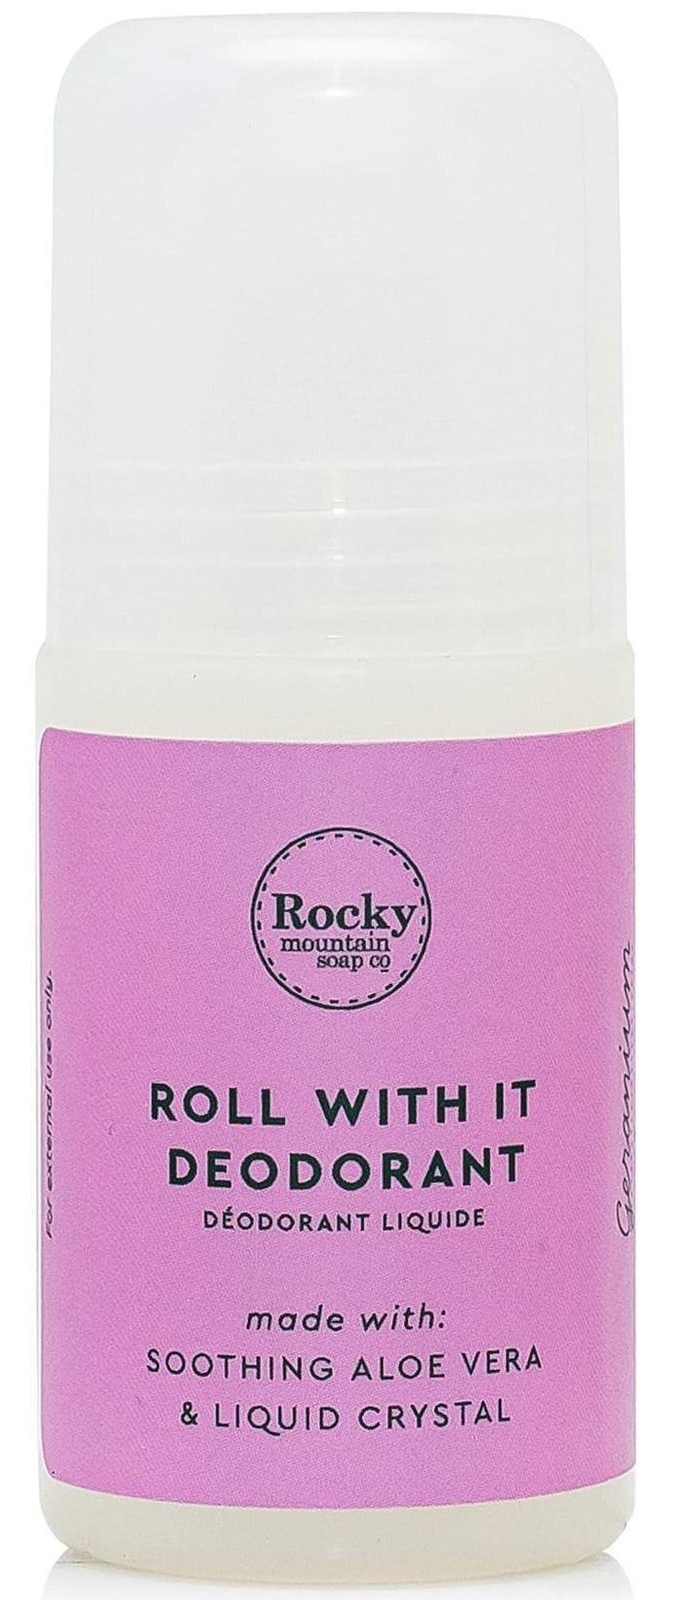 Rocky Mountain Soap Co. Roll With It Deodorant Geranium